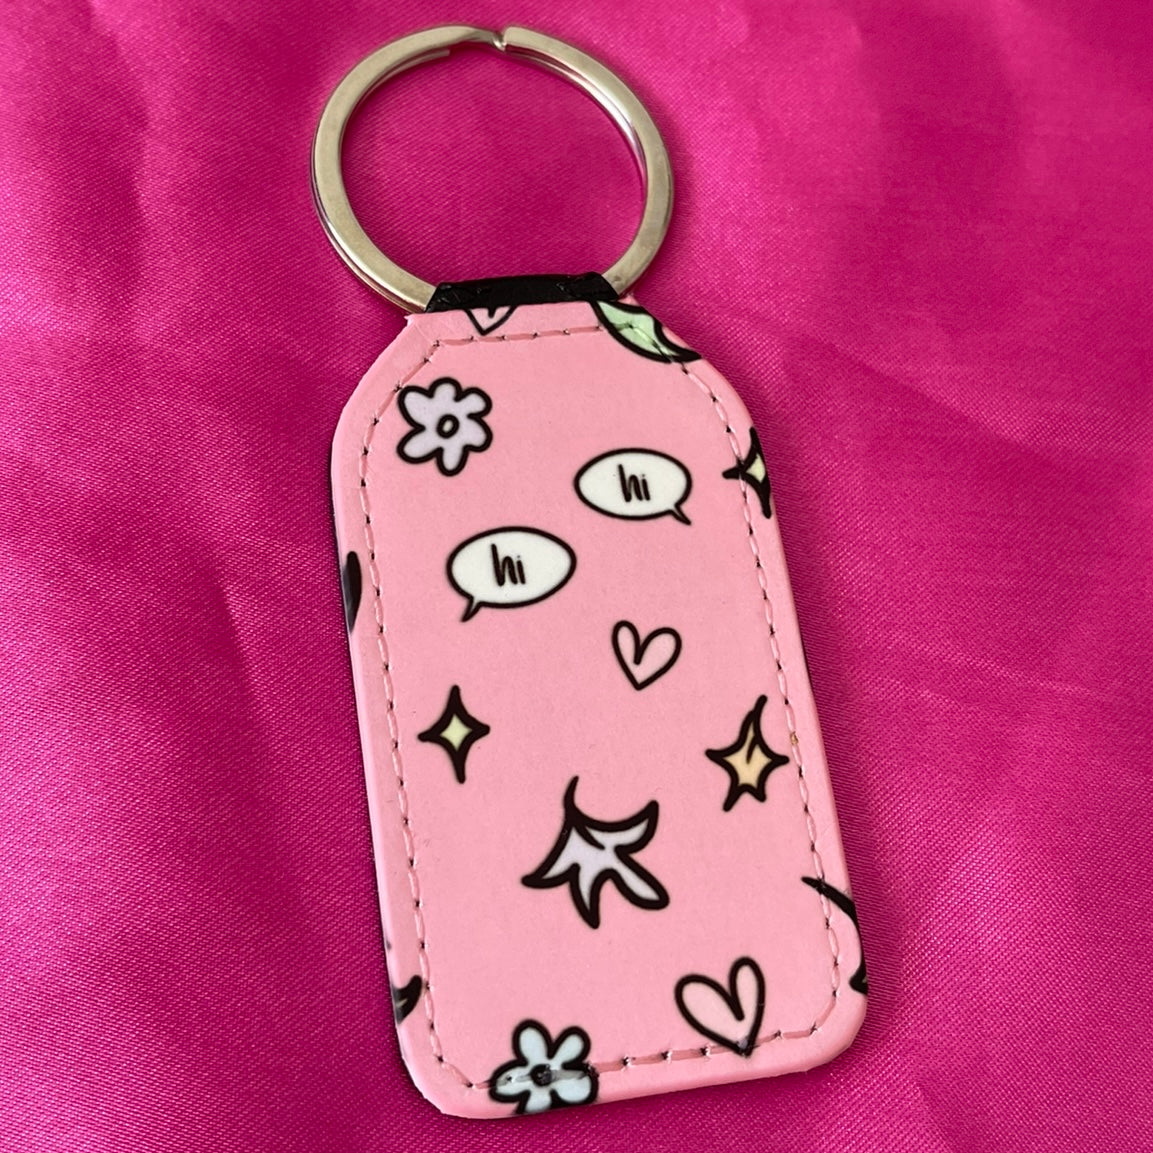 Heartstopper Leather Keyring - Lxyclr Authentic